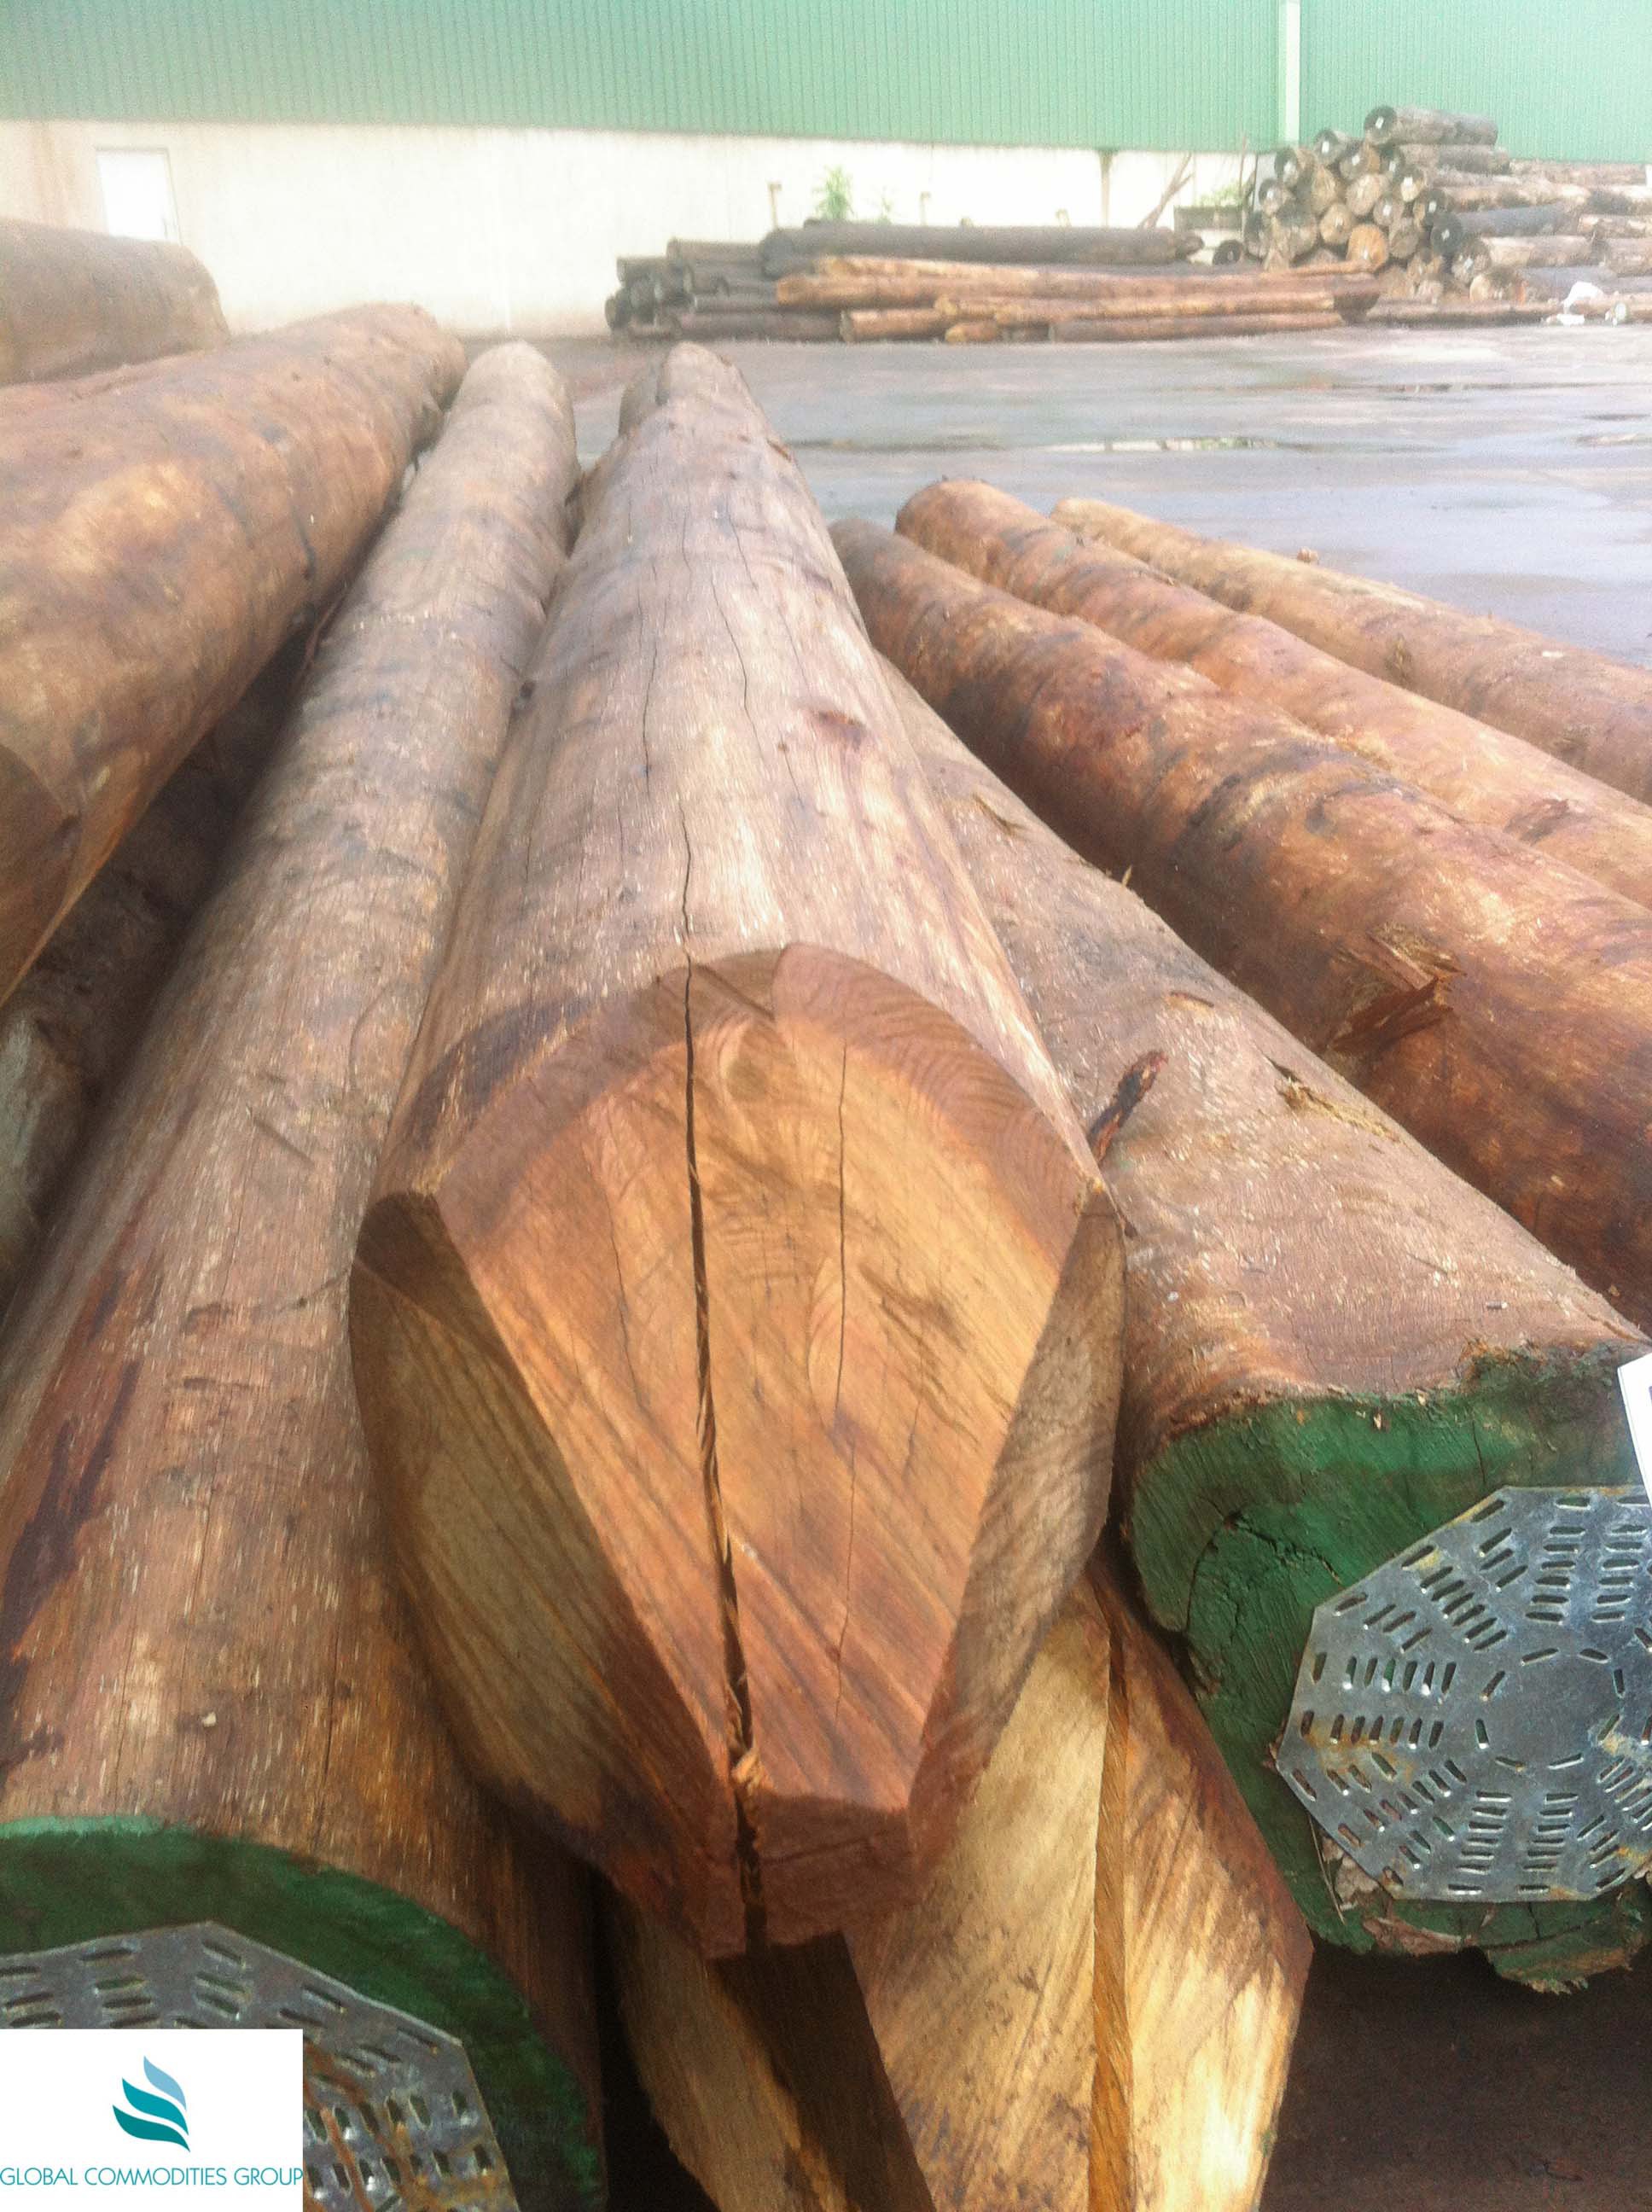 Hardwoods from South Africa | Timber Trading | Global Commodities